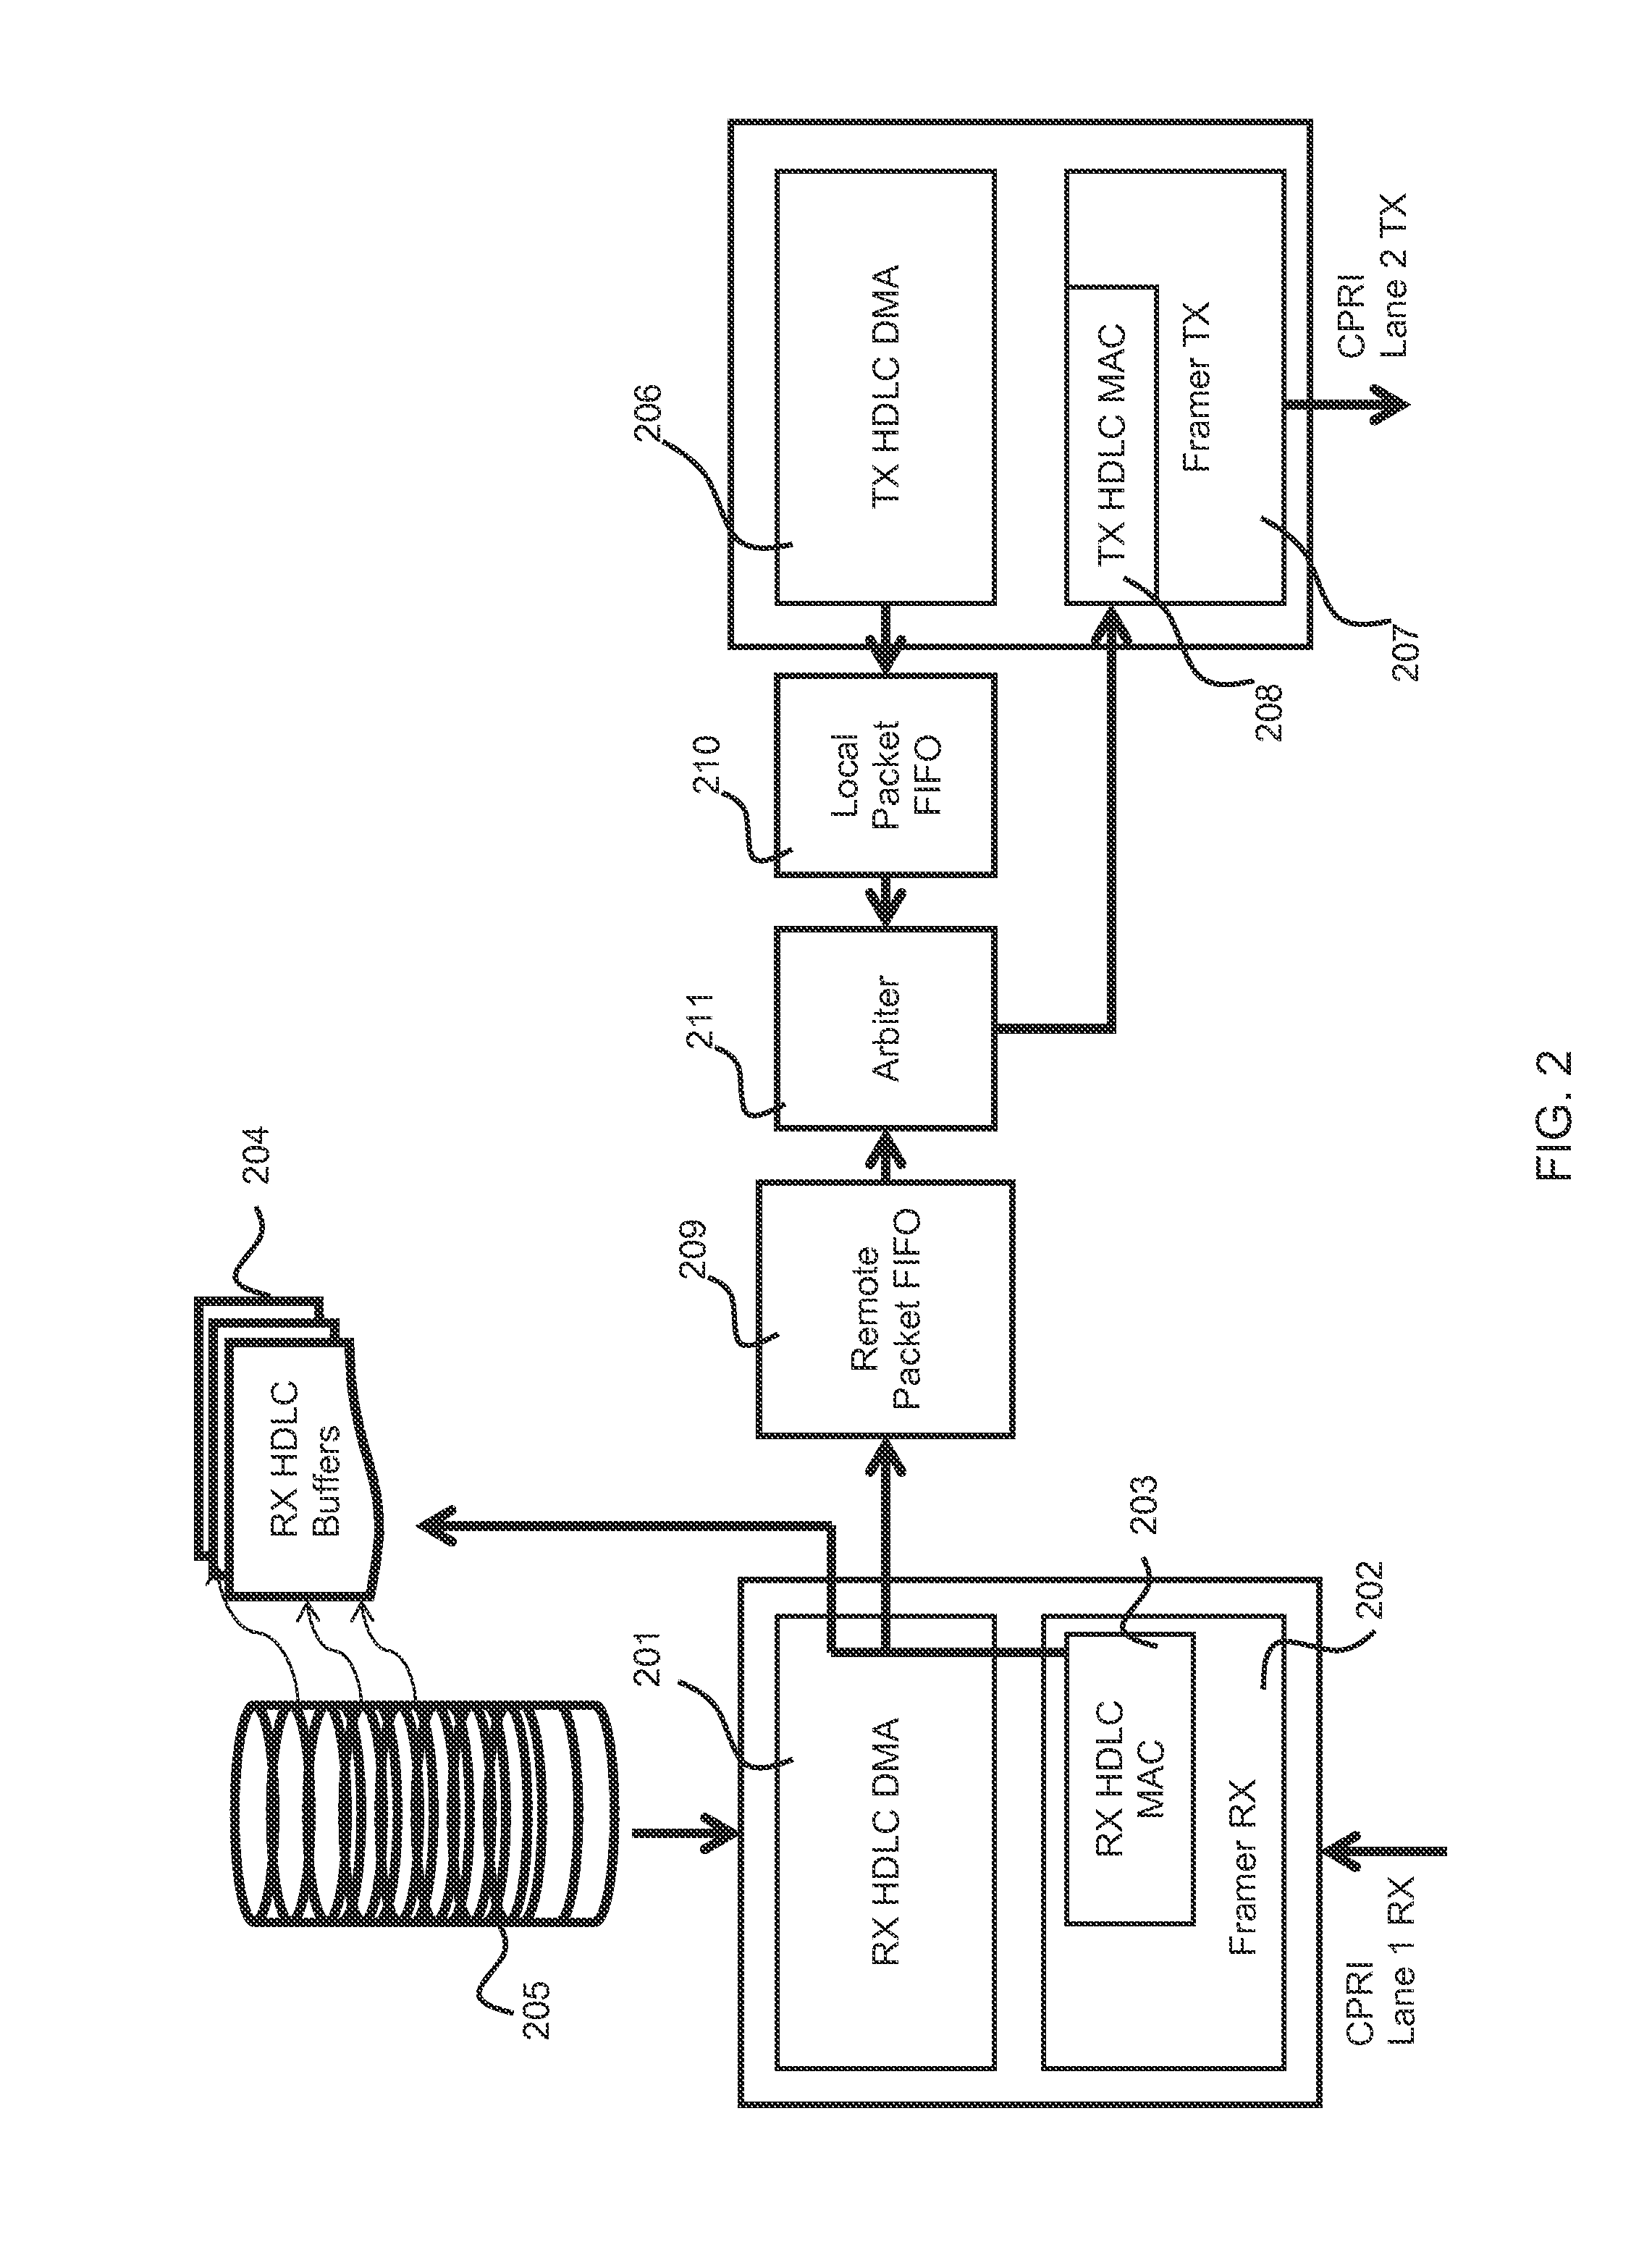 Apparatus, system and method for controlling packet data flow